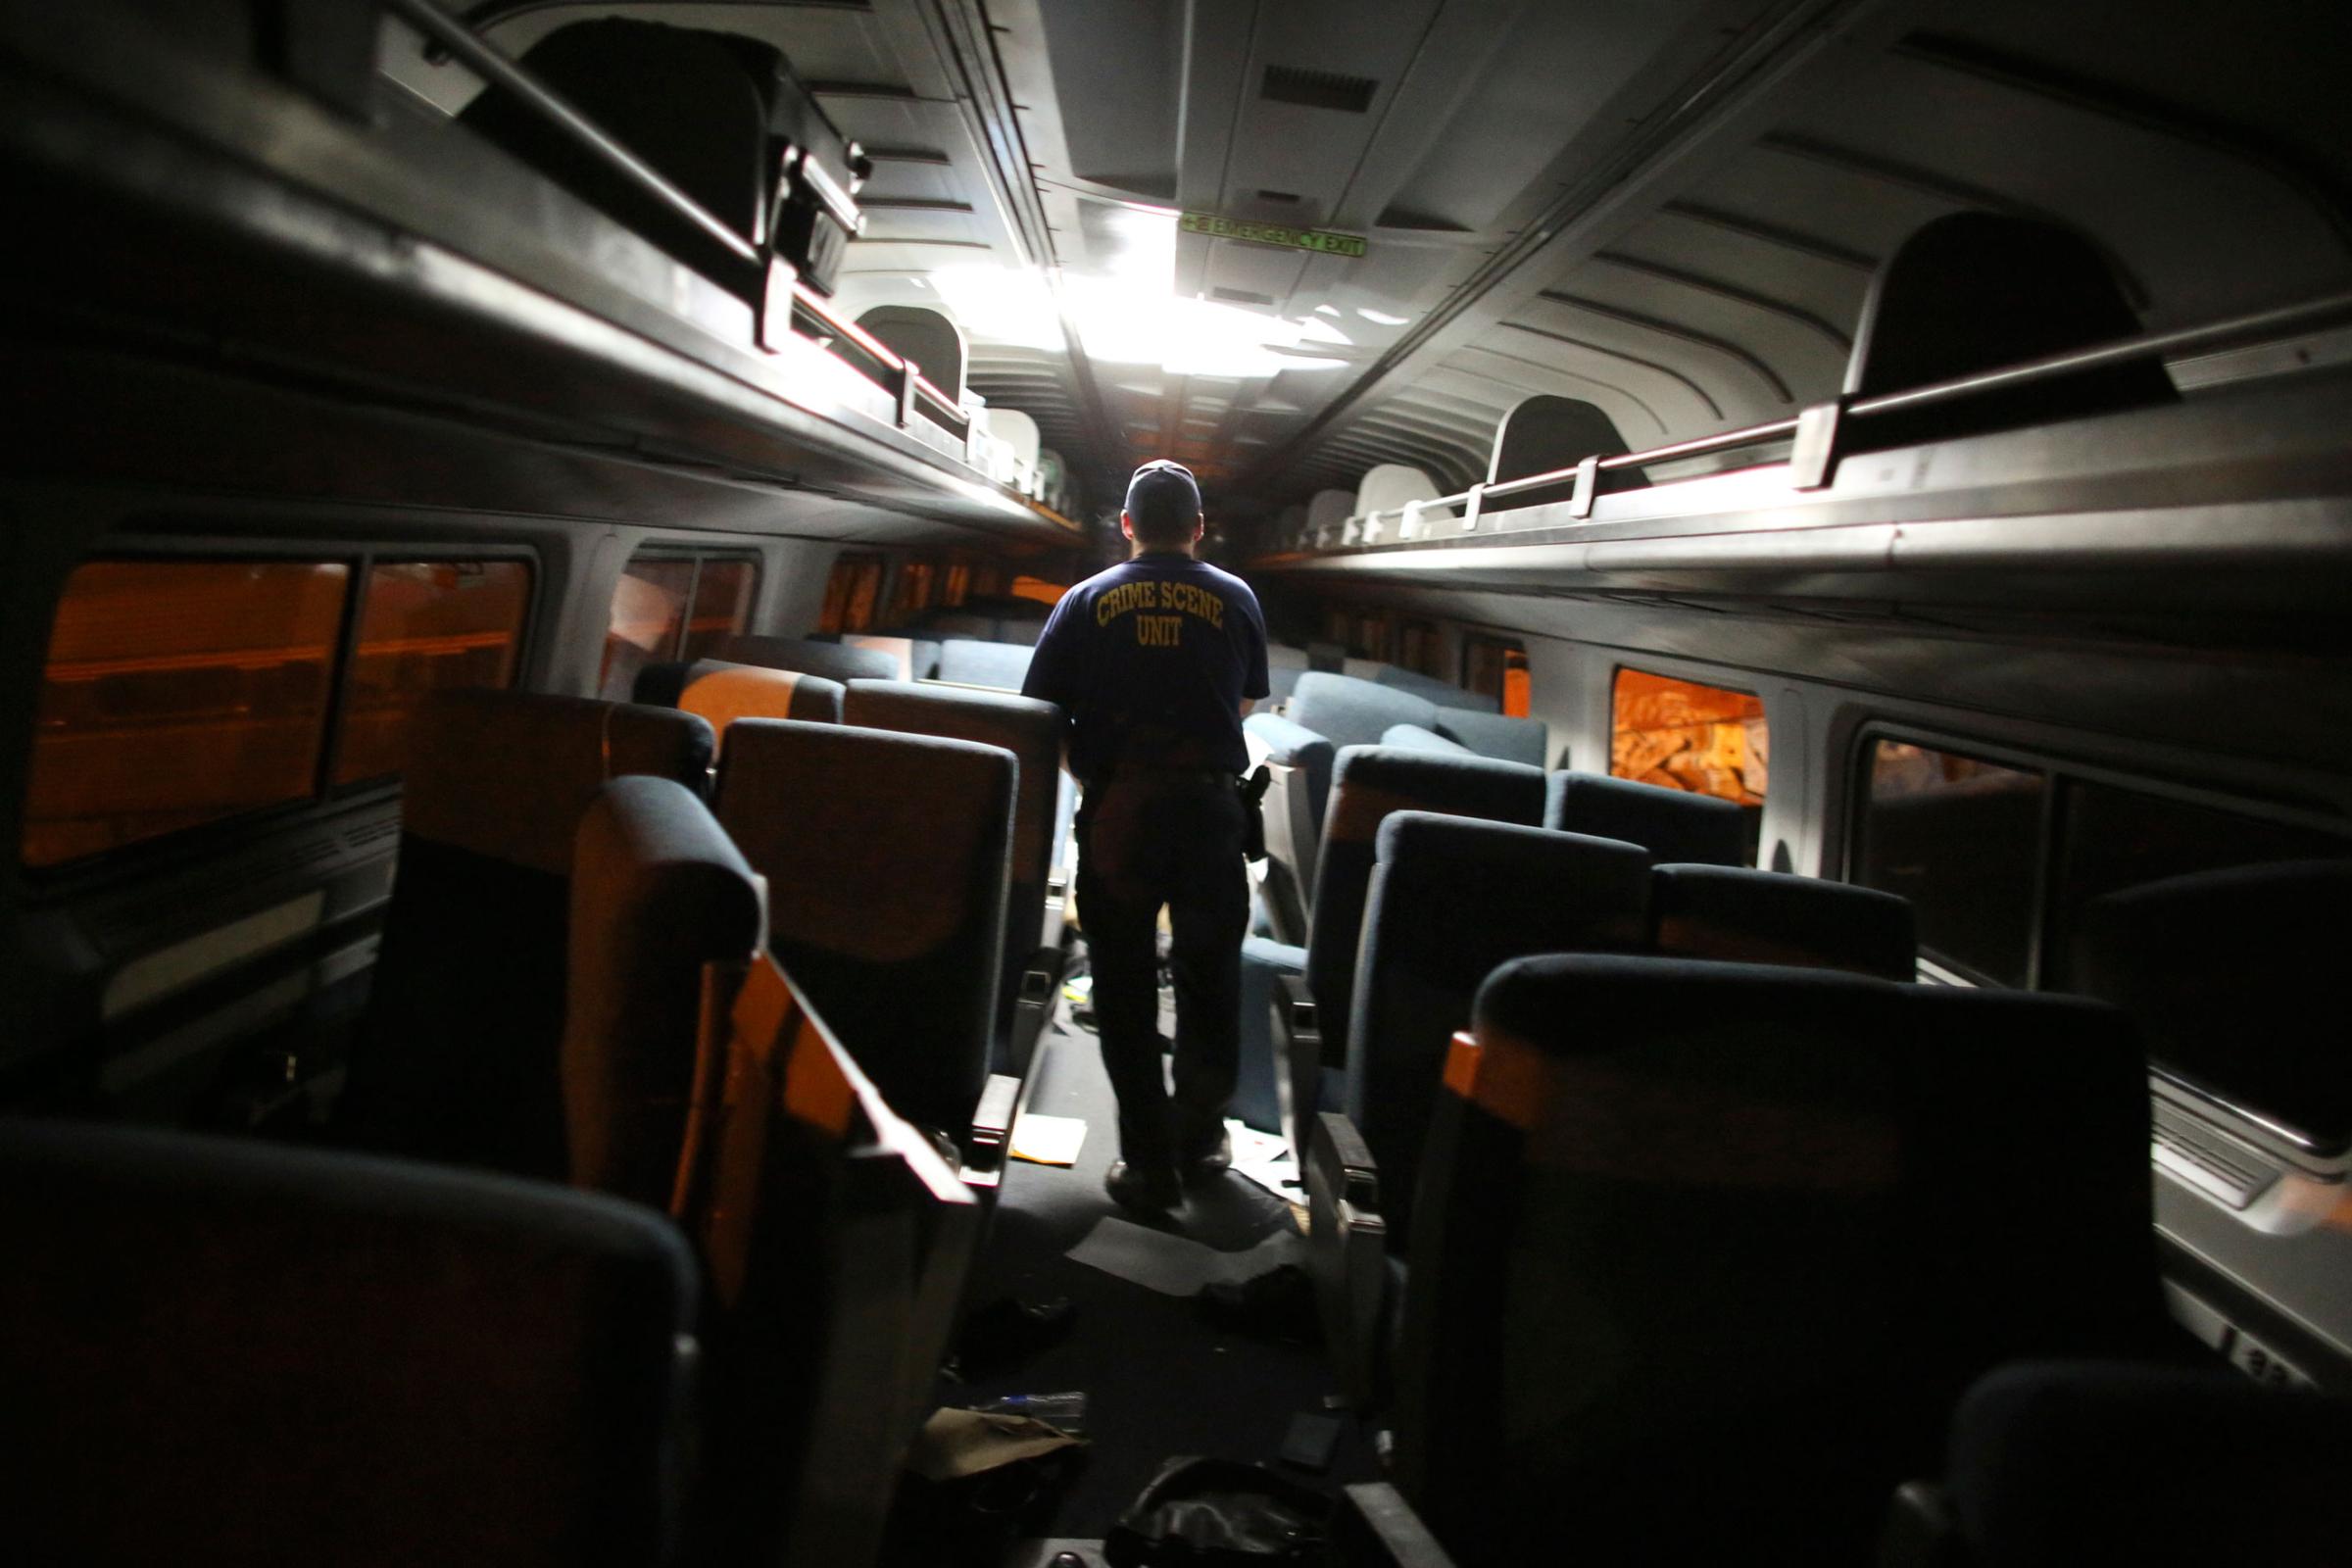 A crime scene investigator looks inside a train car after a train wreck on May 12, 2015, in Philadelphia.